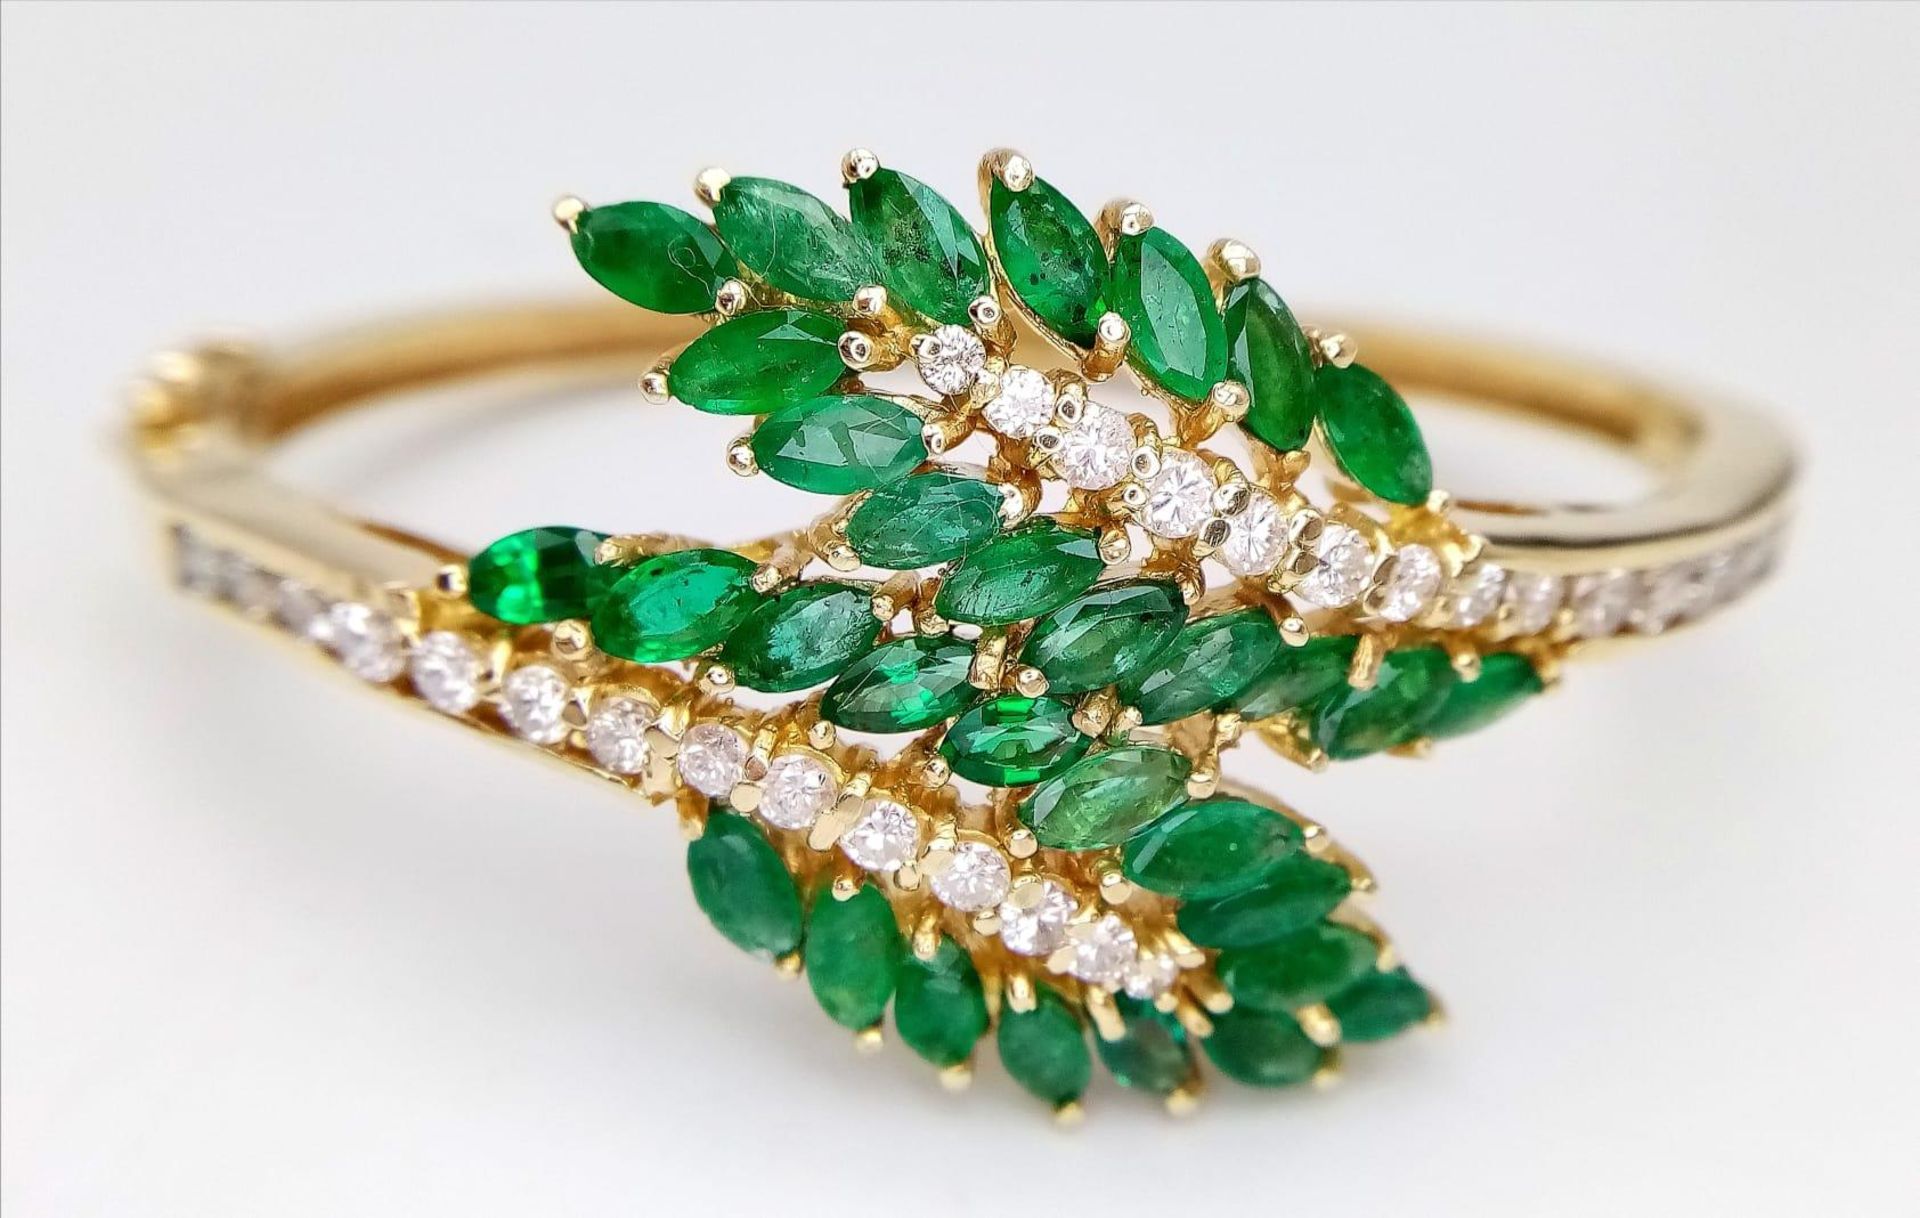 A DIAMOND AND EMERALD LEAF DESIGN BANGLE IN CROSSOVER STYLE SET IN18K GOLD . 33.5gms 10457